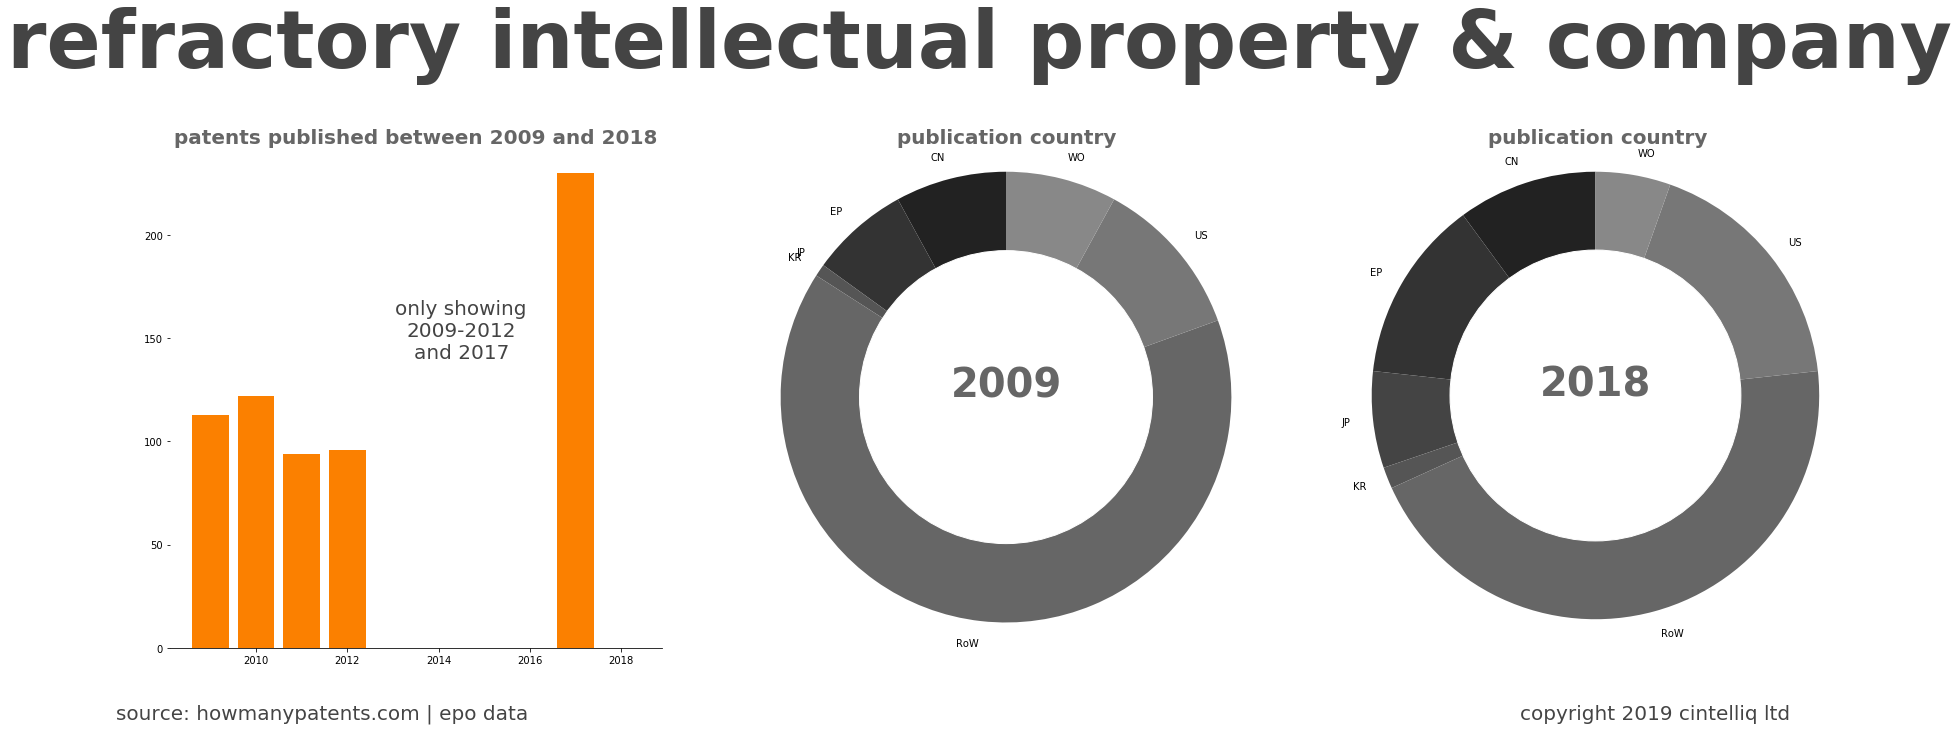 summary of patents for Refractory Intellectual Property & Company